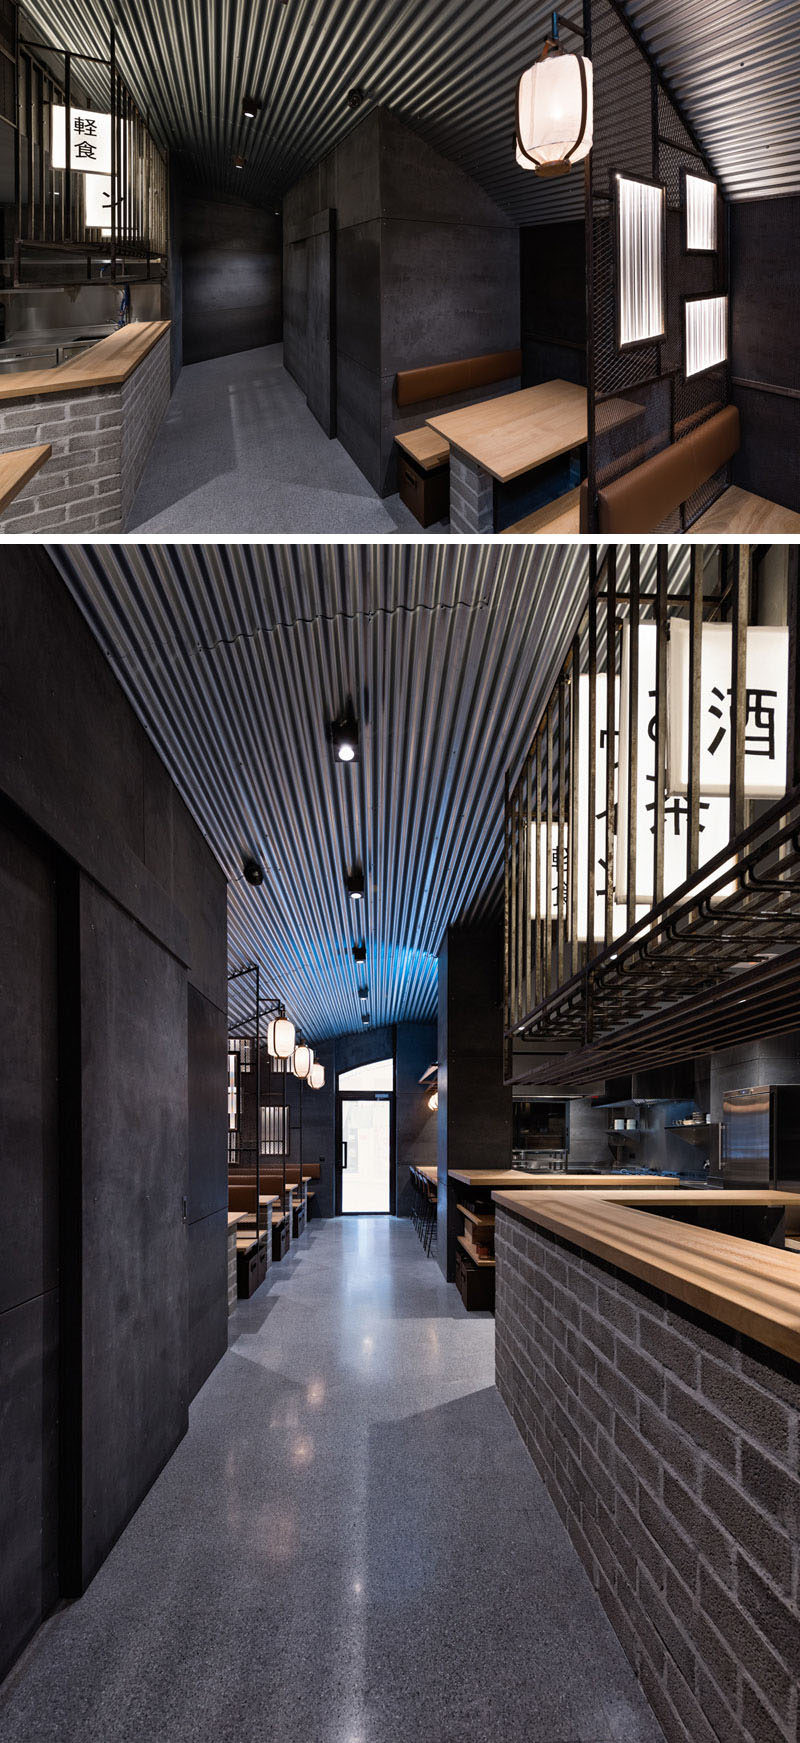 Industrial Interior Design - This Restaurant and bar goes for a warehouse chic style with metal, concrete, and wood. At the back of this modern restaurant is a small dimly lit tunnel covered with metal panels that leads to the main dining room.